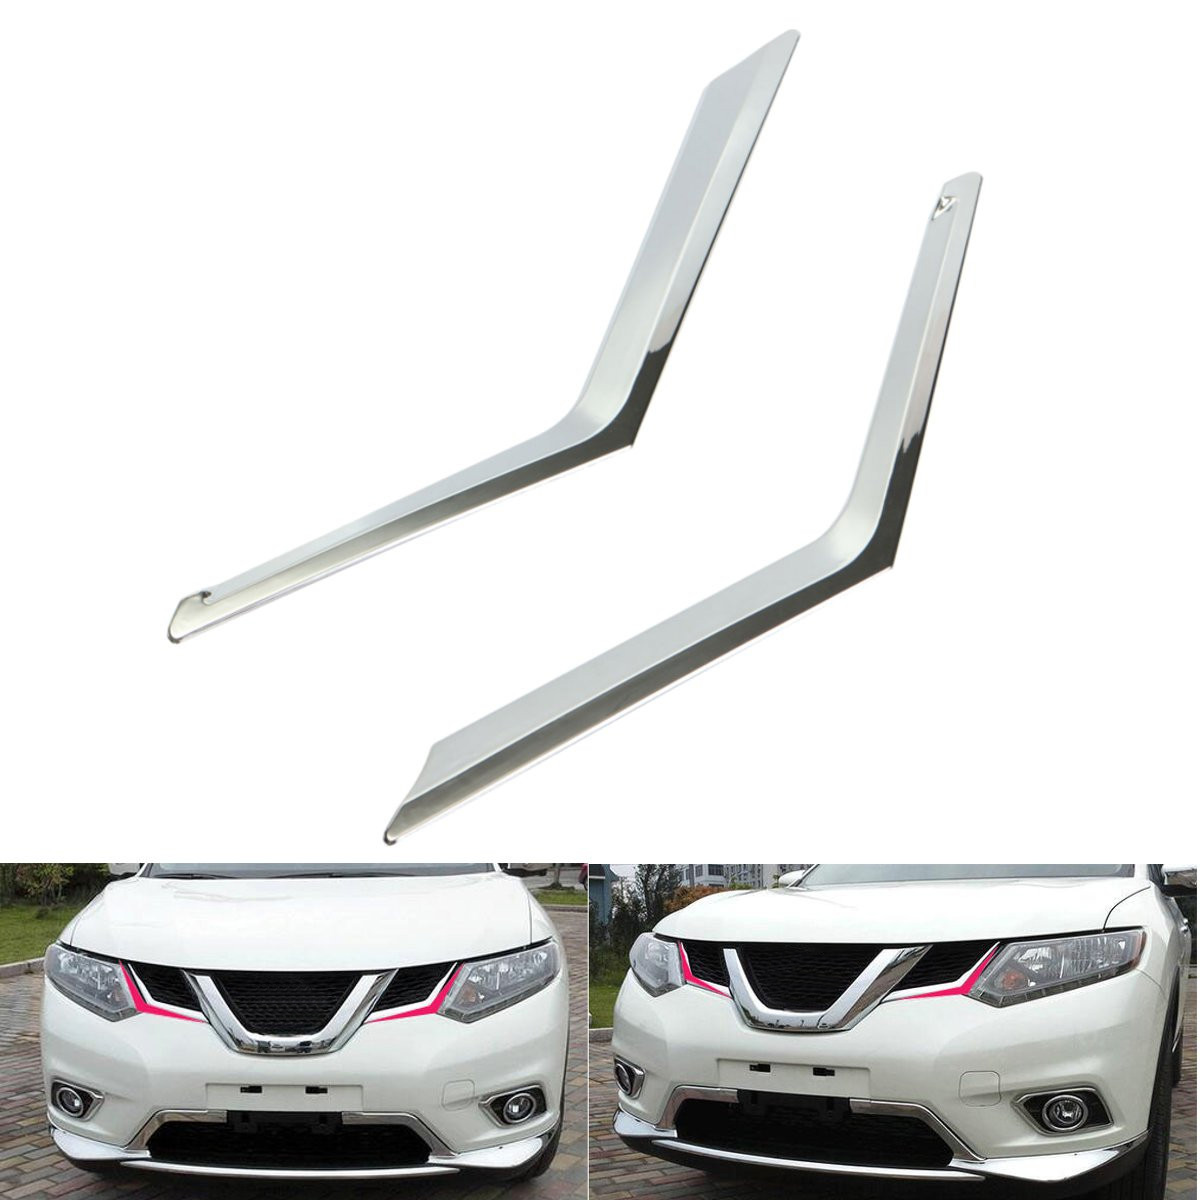 

2pcs Front Grille Grill Chrome Cover Trim Molding for Rogue X-Trail 2014-2015